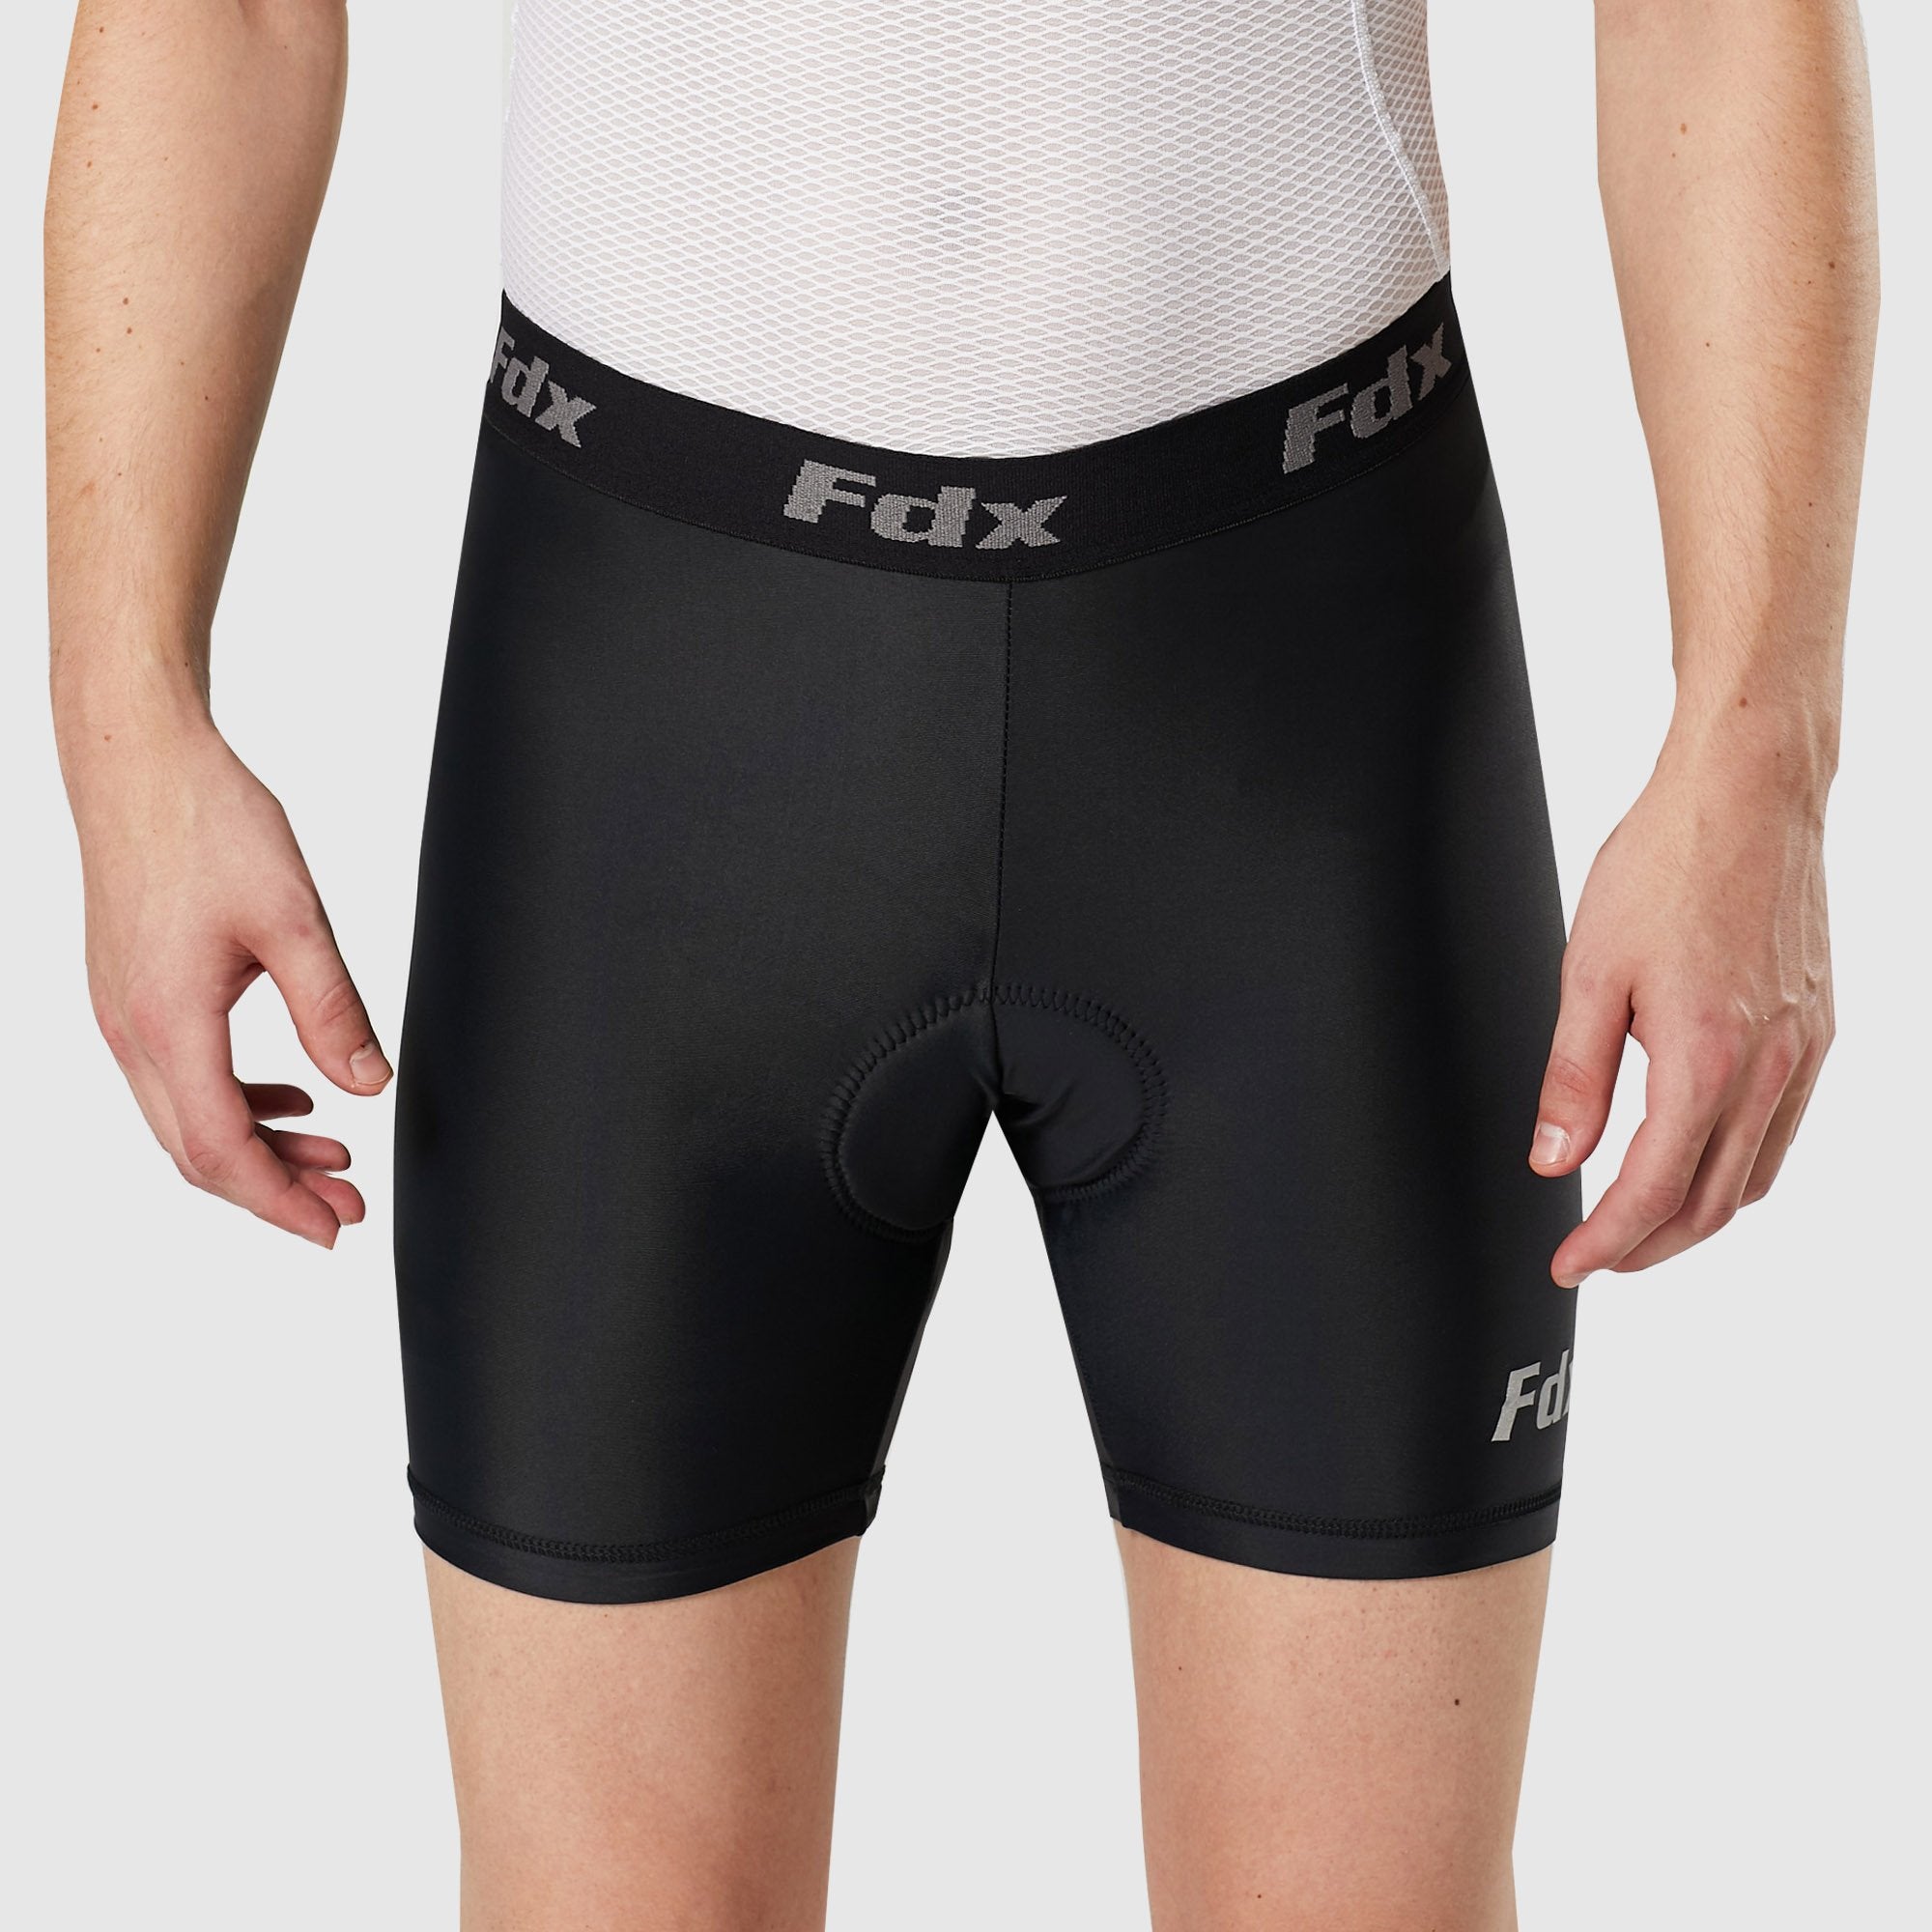 FDX Men's Black Padded Under Short Lightweight Breathable Quick Dry Fabric Electric Gripper MTB  Liner 